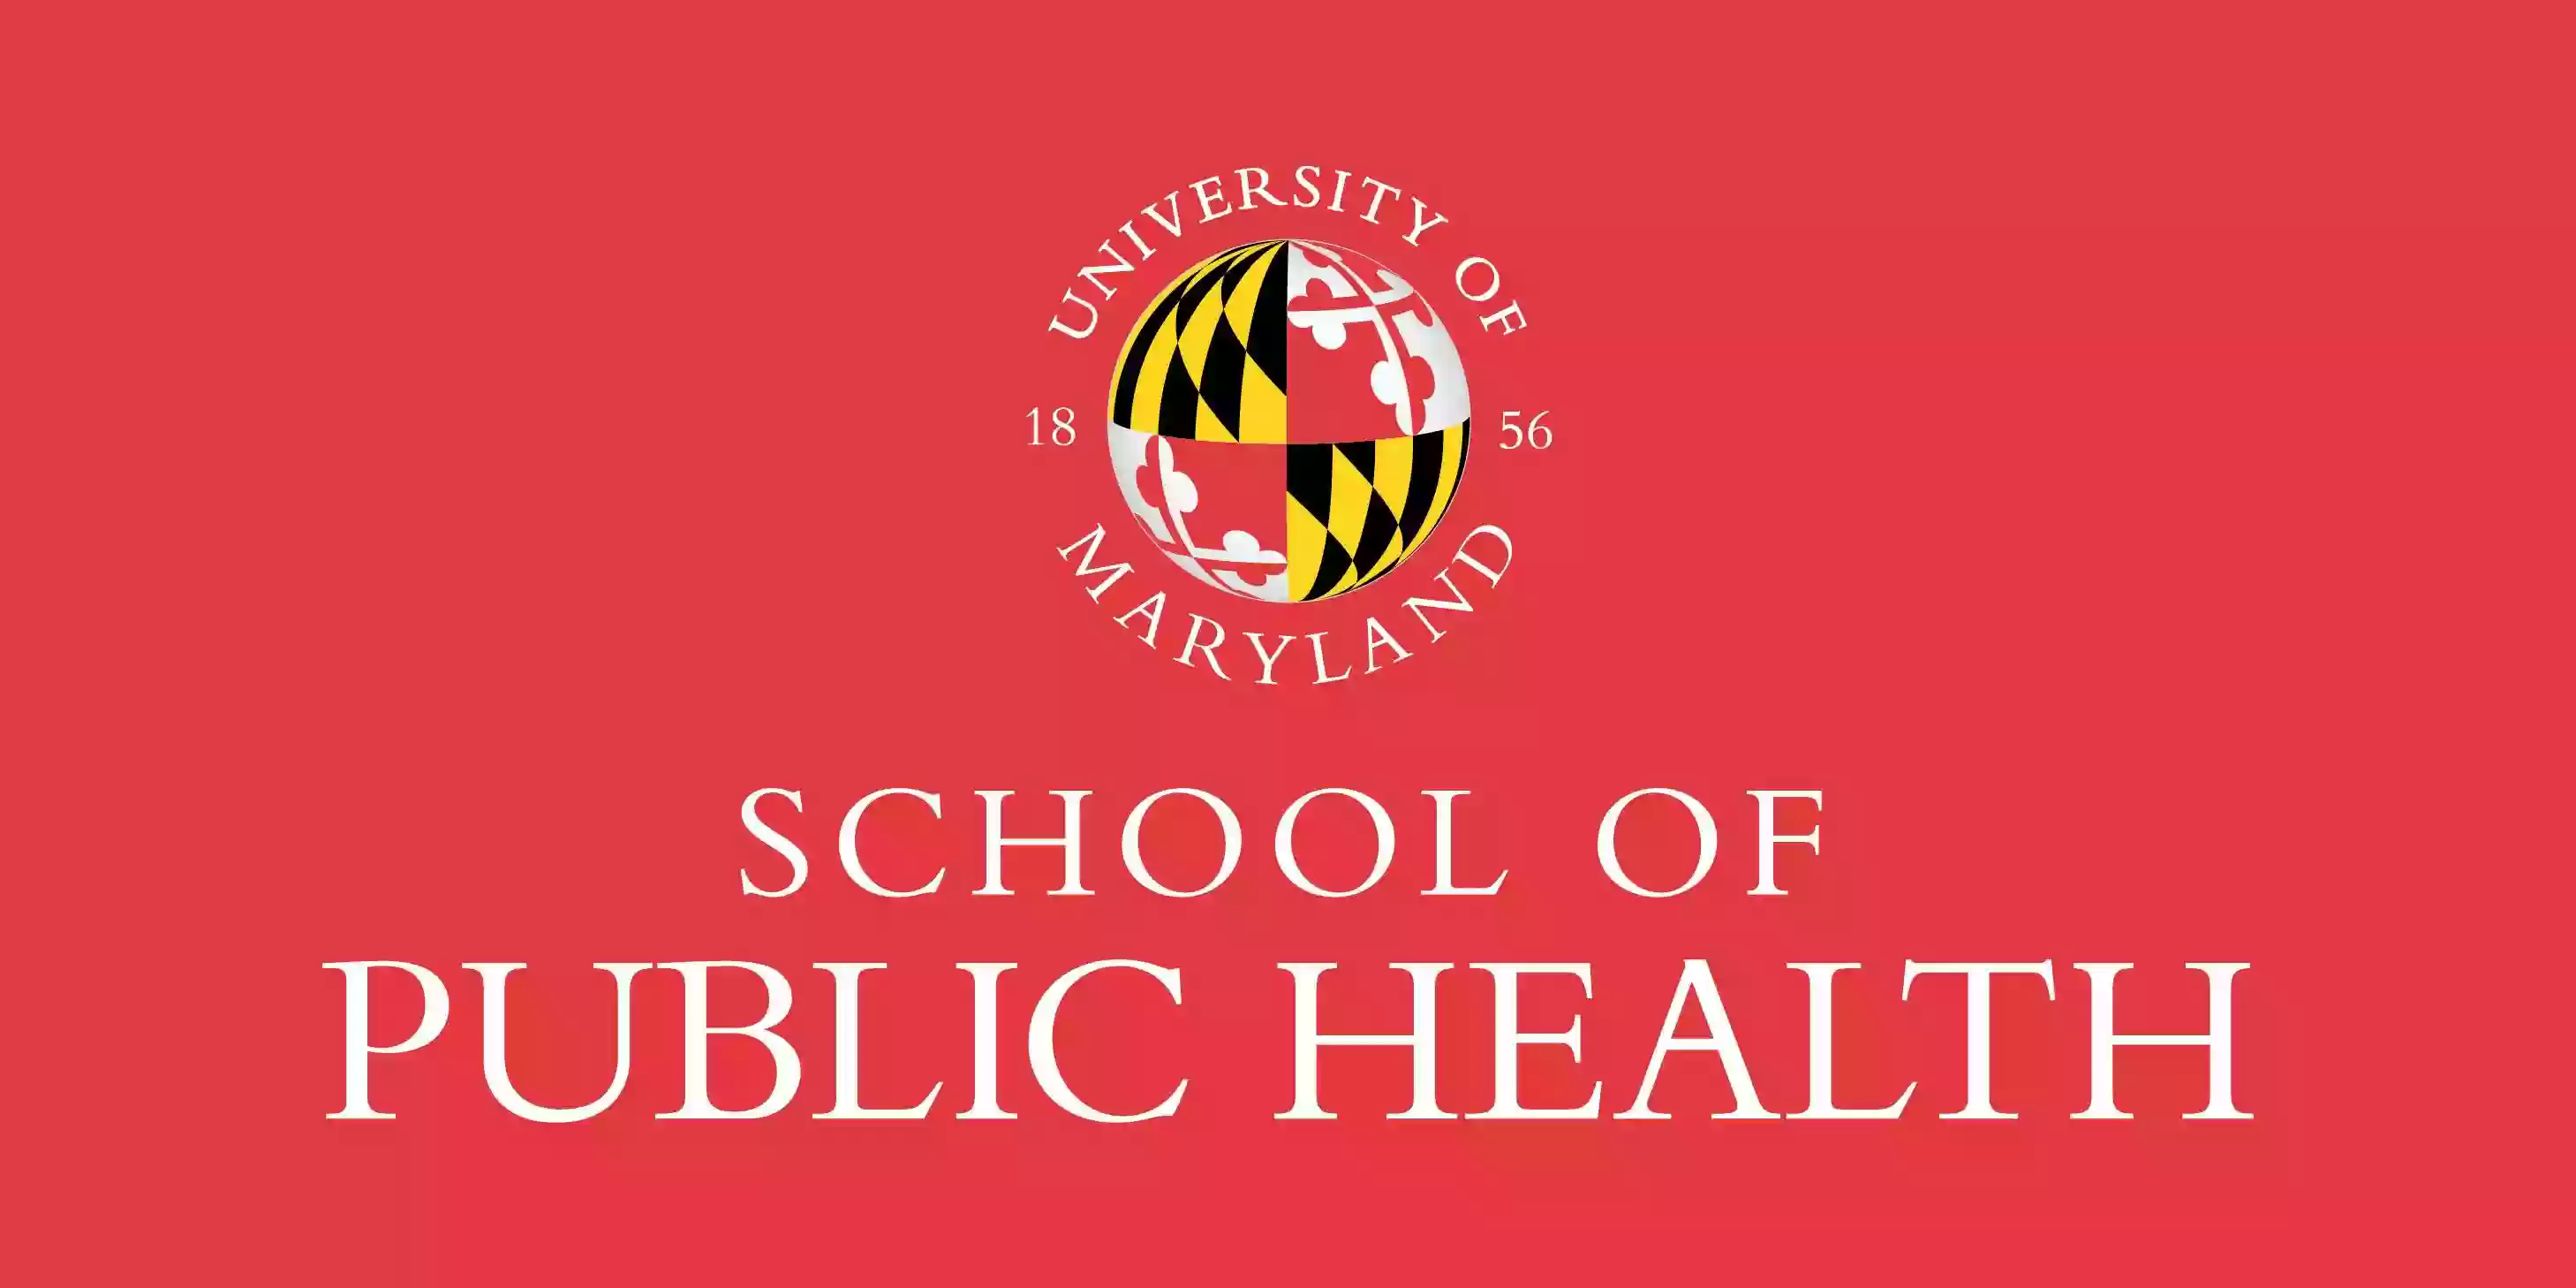 Maryland Institute for Applied Environmental Health